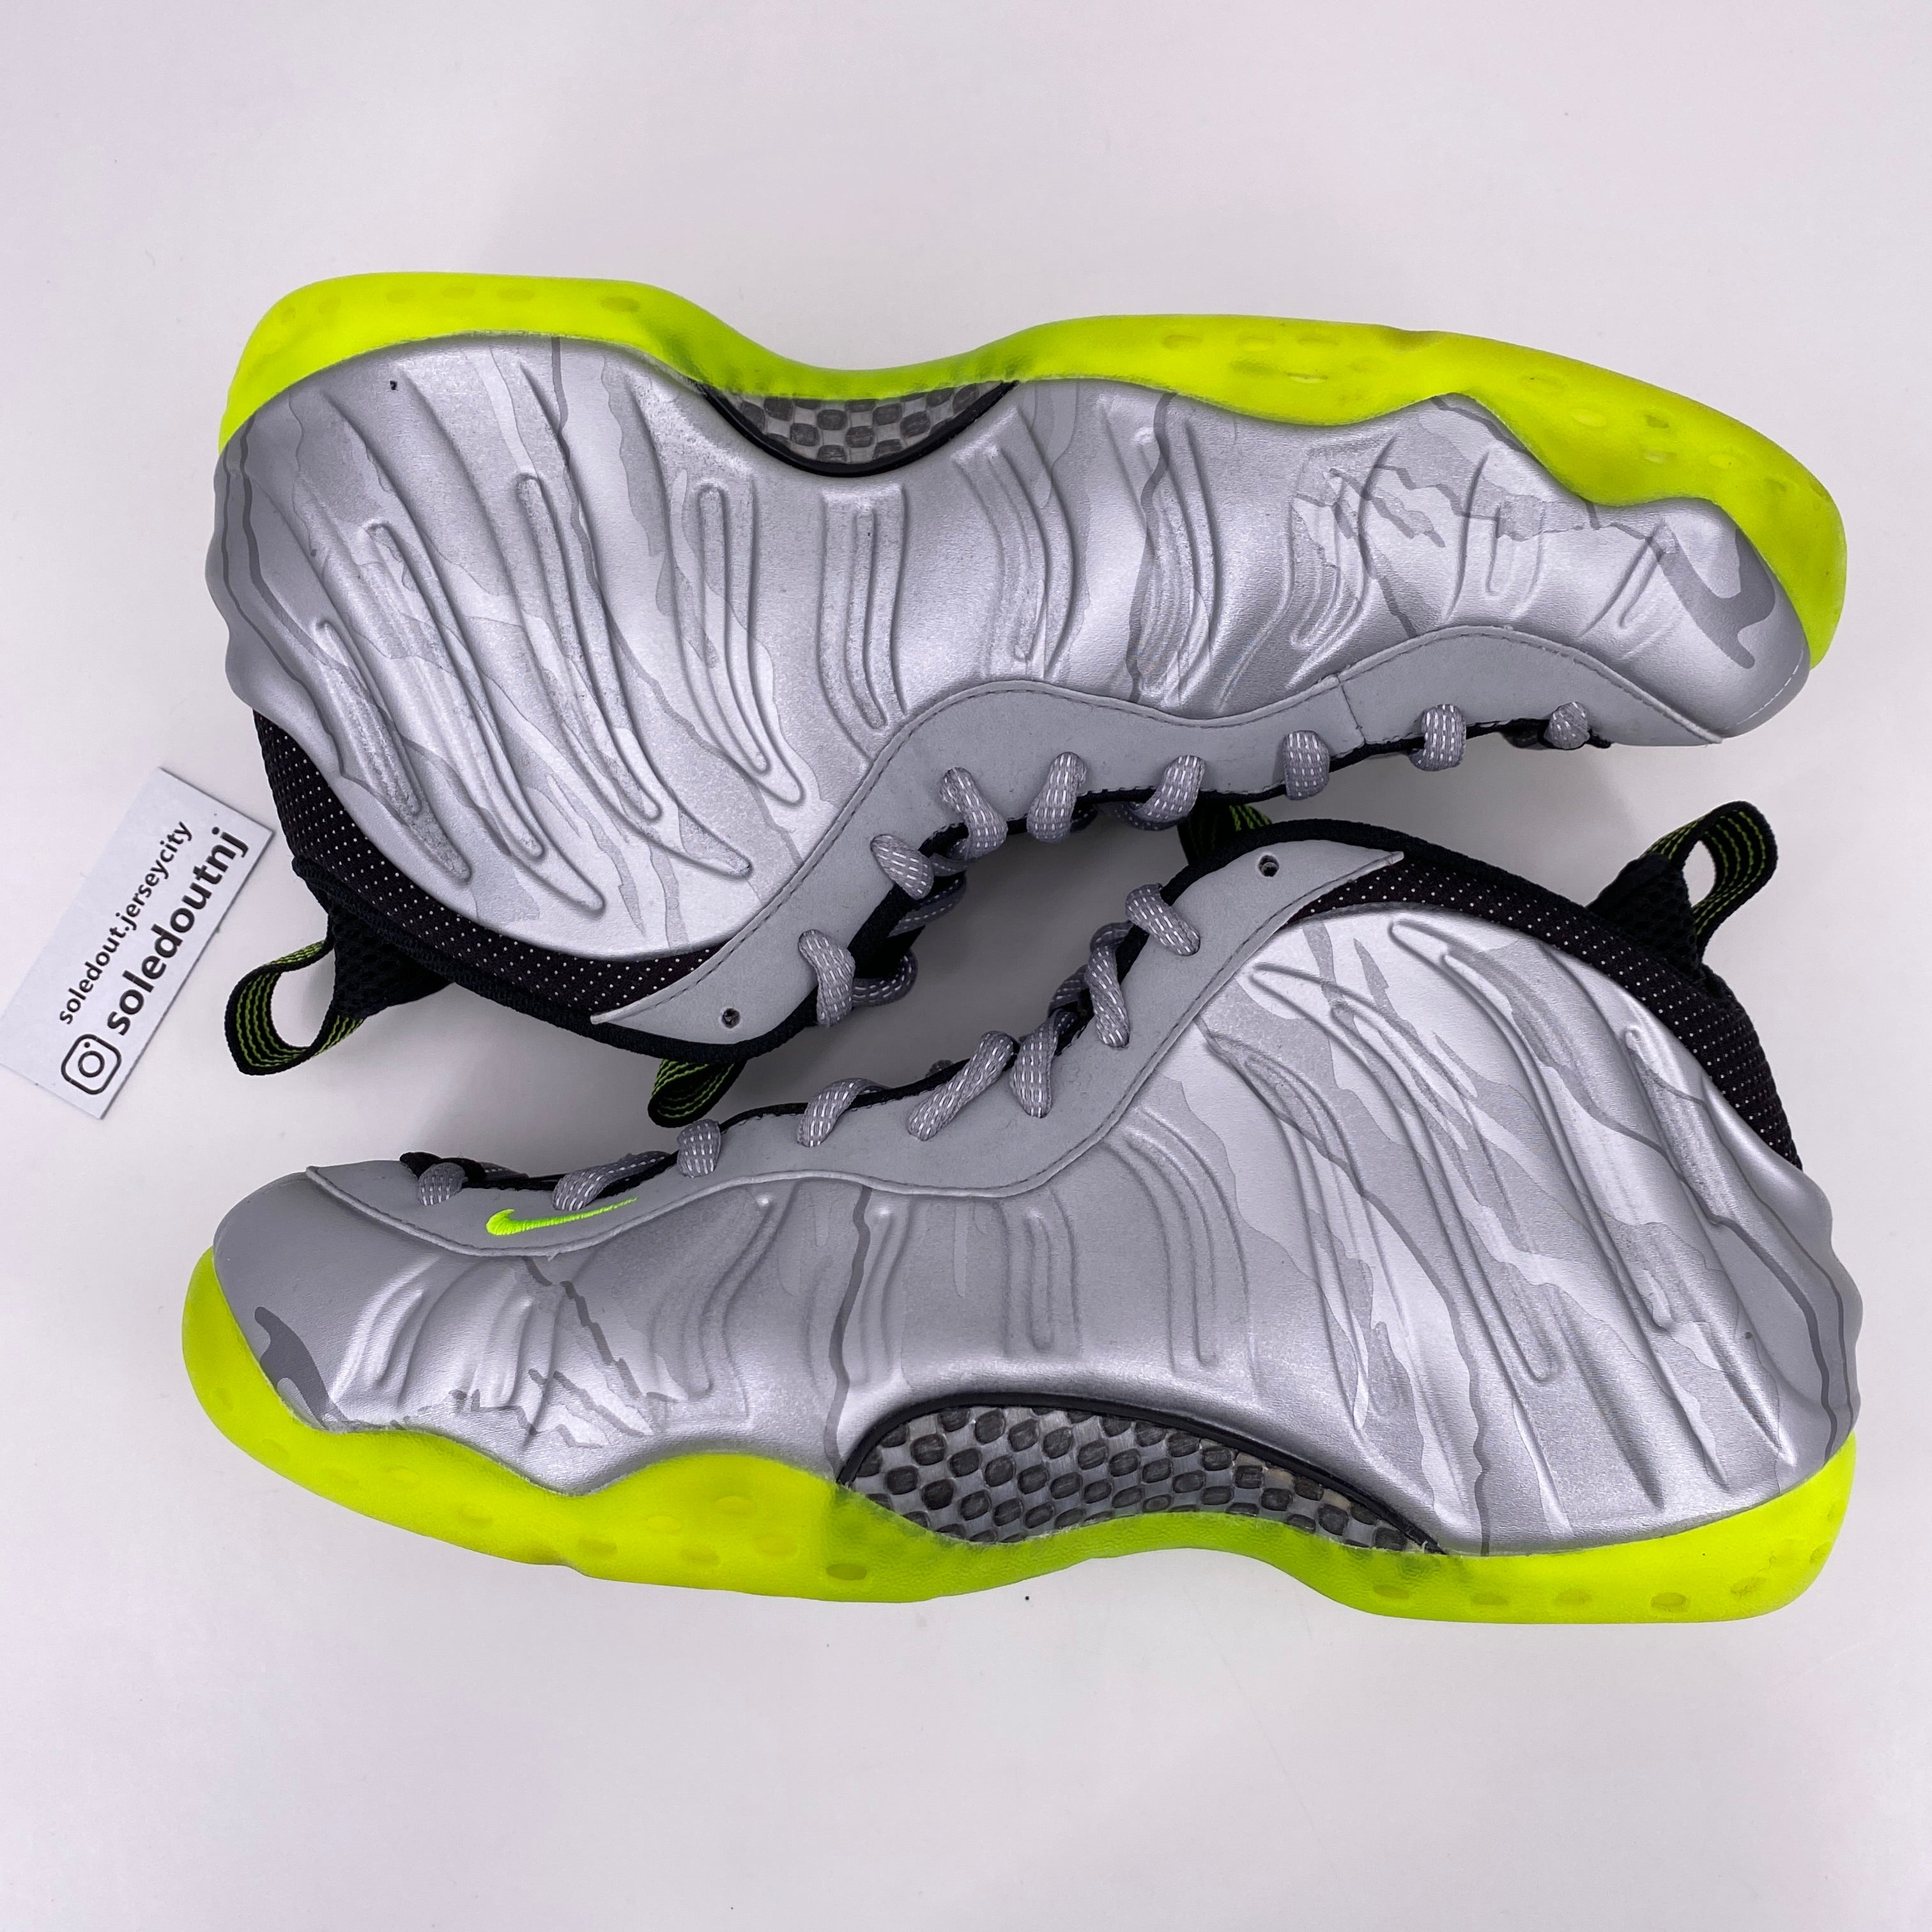 Nike Air Foamposite One "Silver Volt Camo" 2014 Used Size 10